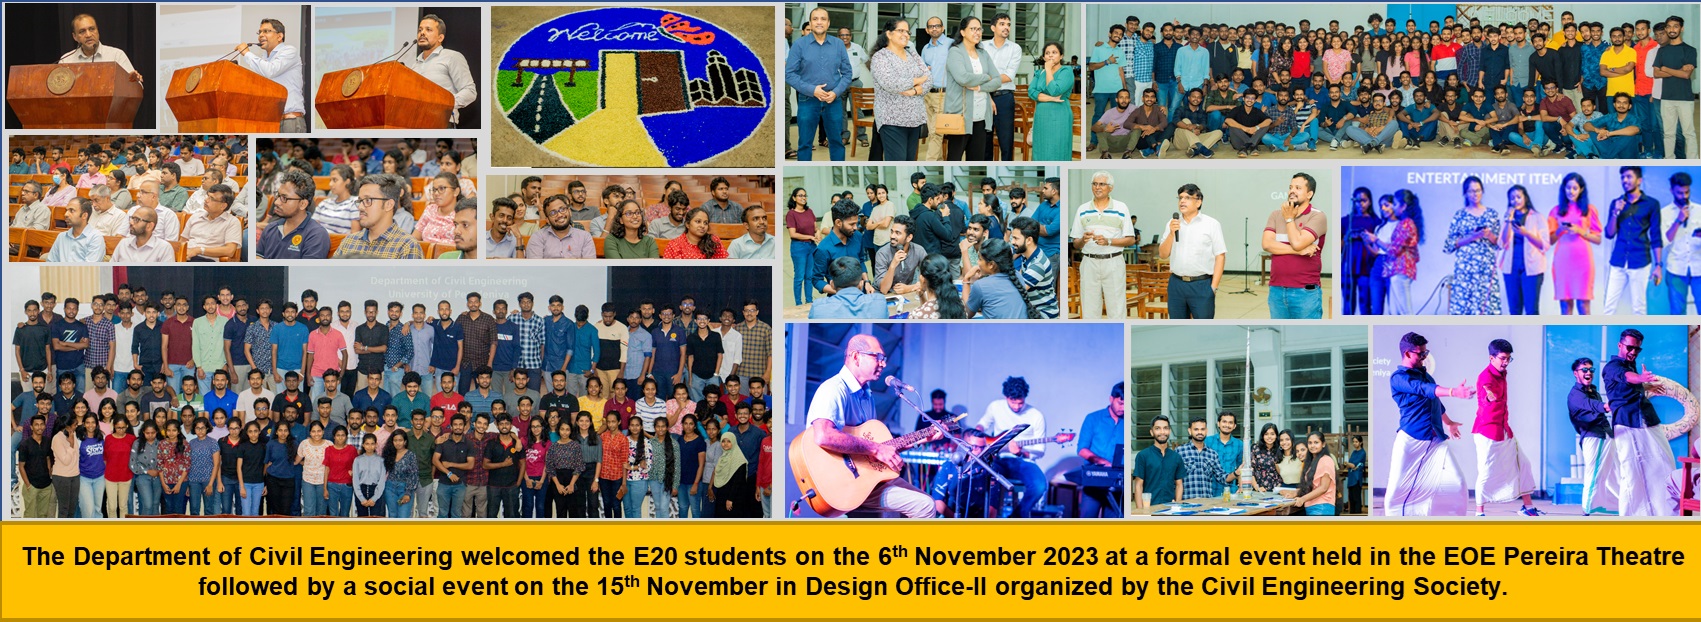 DCE Welcome of E20 Students, 6th Nov, 2 pm/EOE